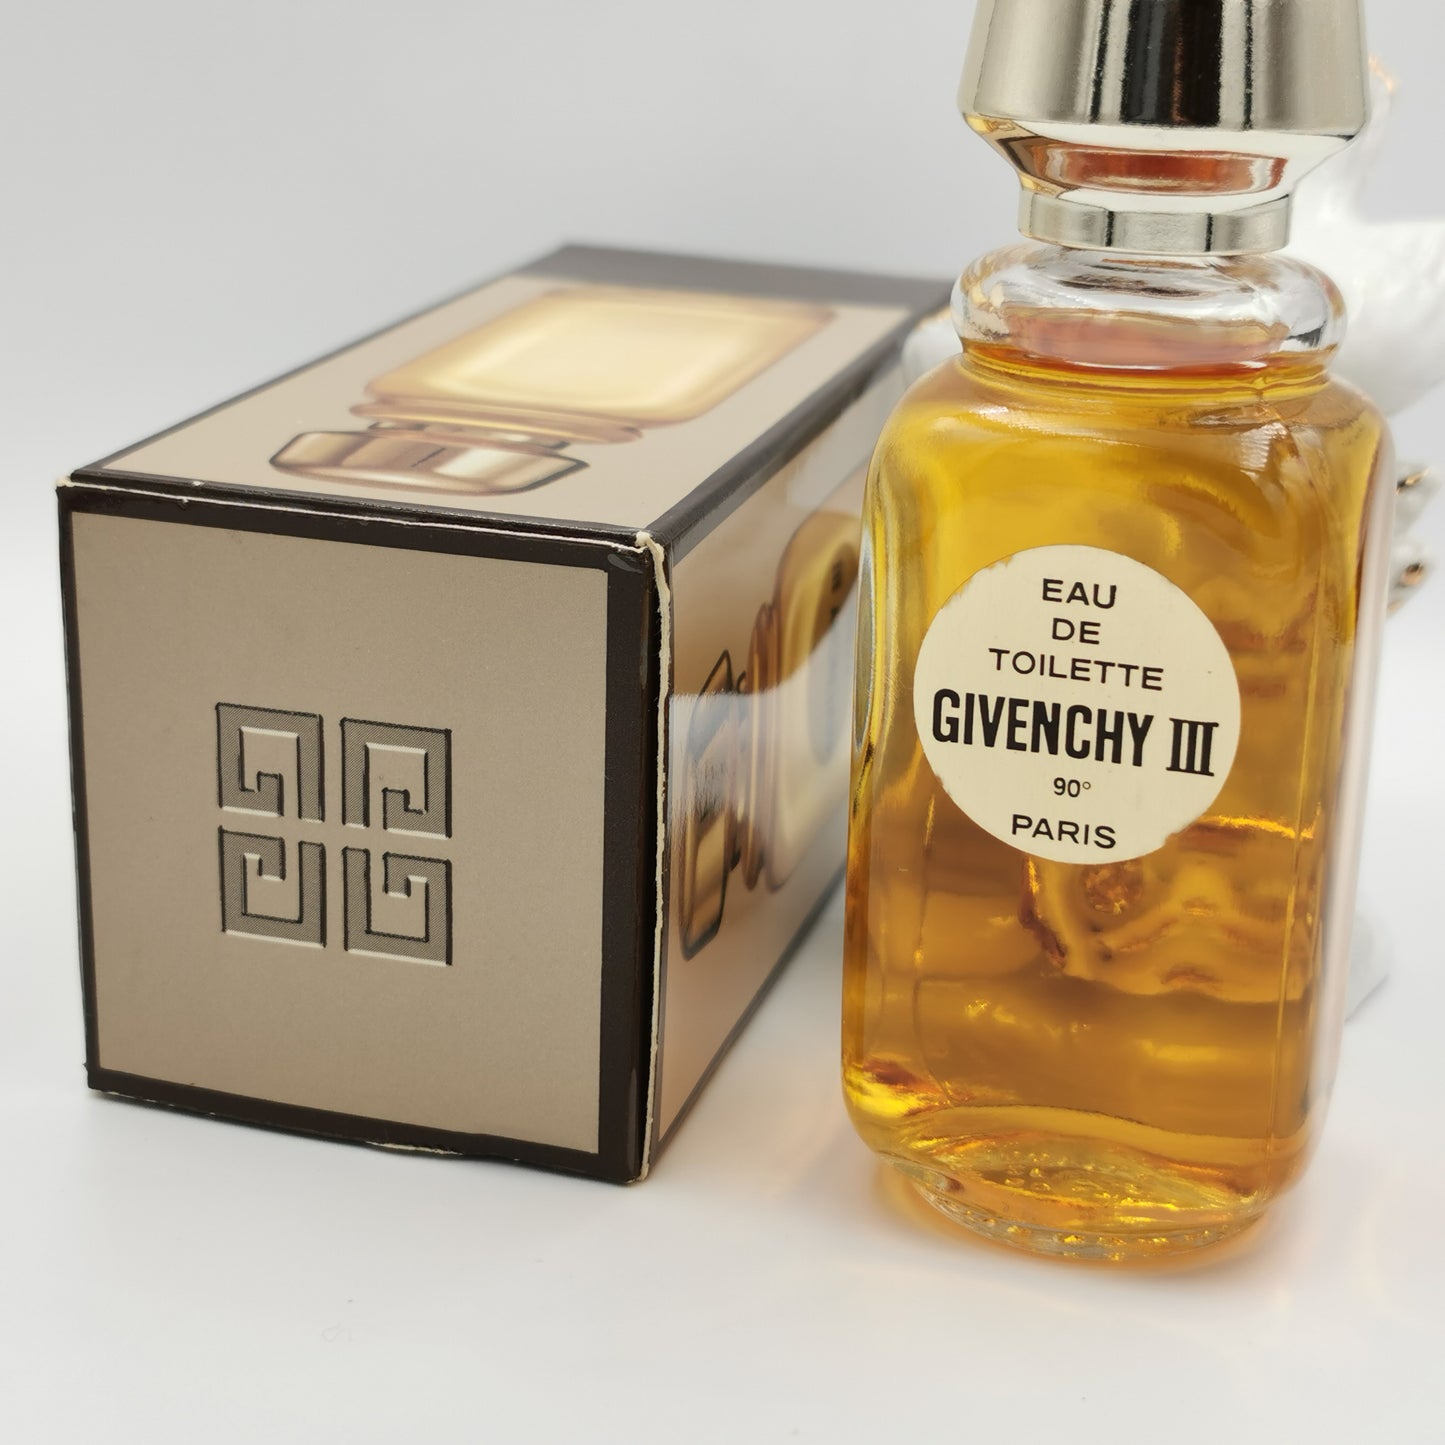 Givenchy III by Givenchy 60ml EDT Splash VINTAGE